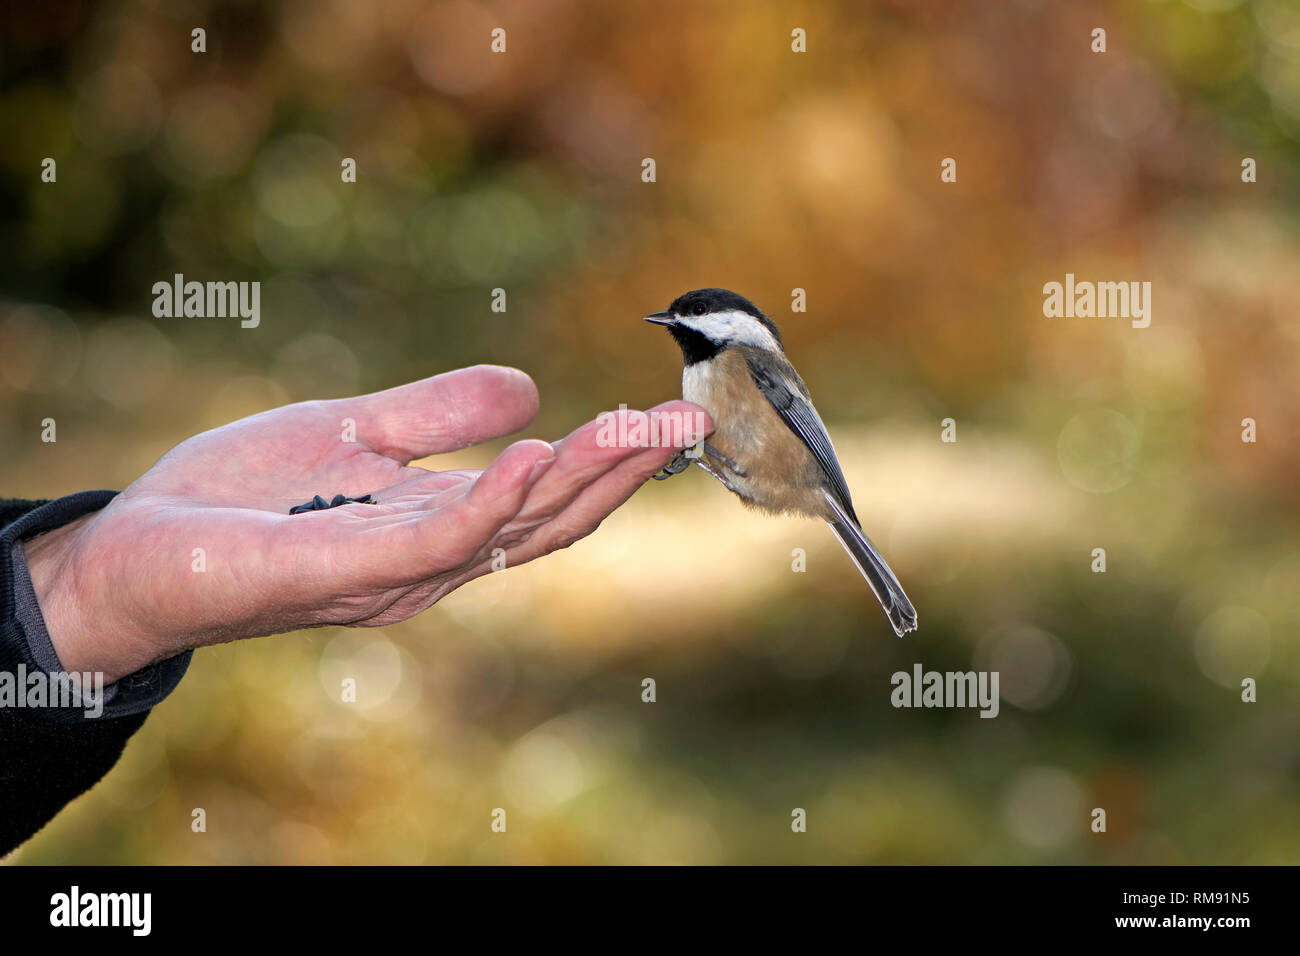 A Black-capped Chickadee (Poecile atricapillus) sitting on a man`s hand holding sunflowers seeds. Stock Photo